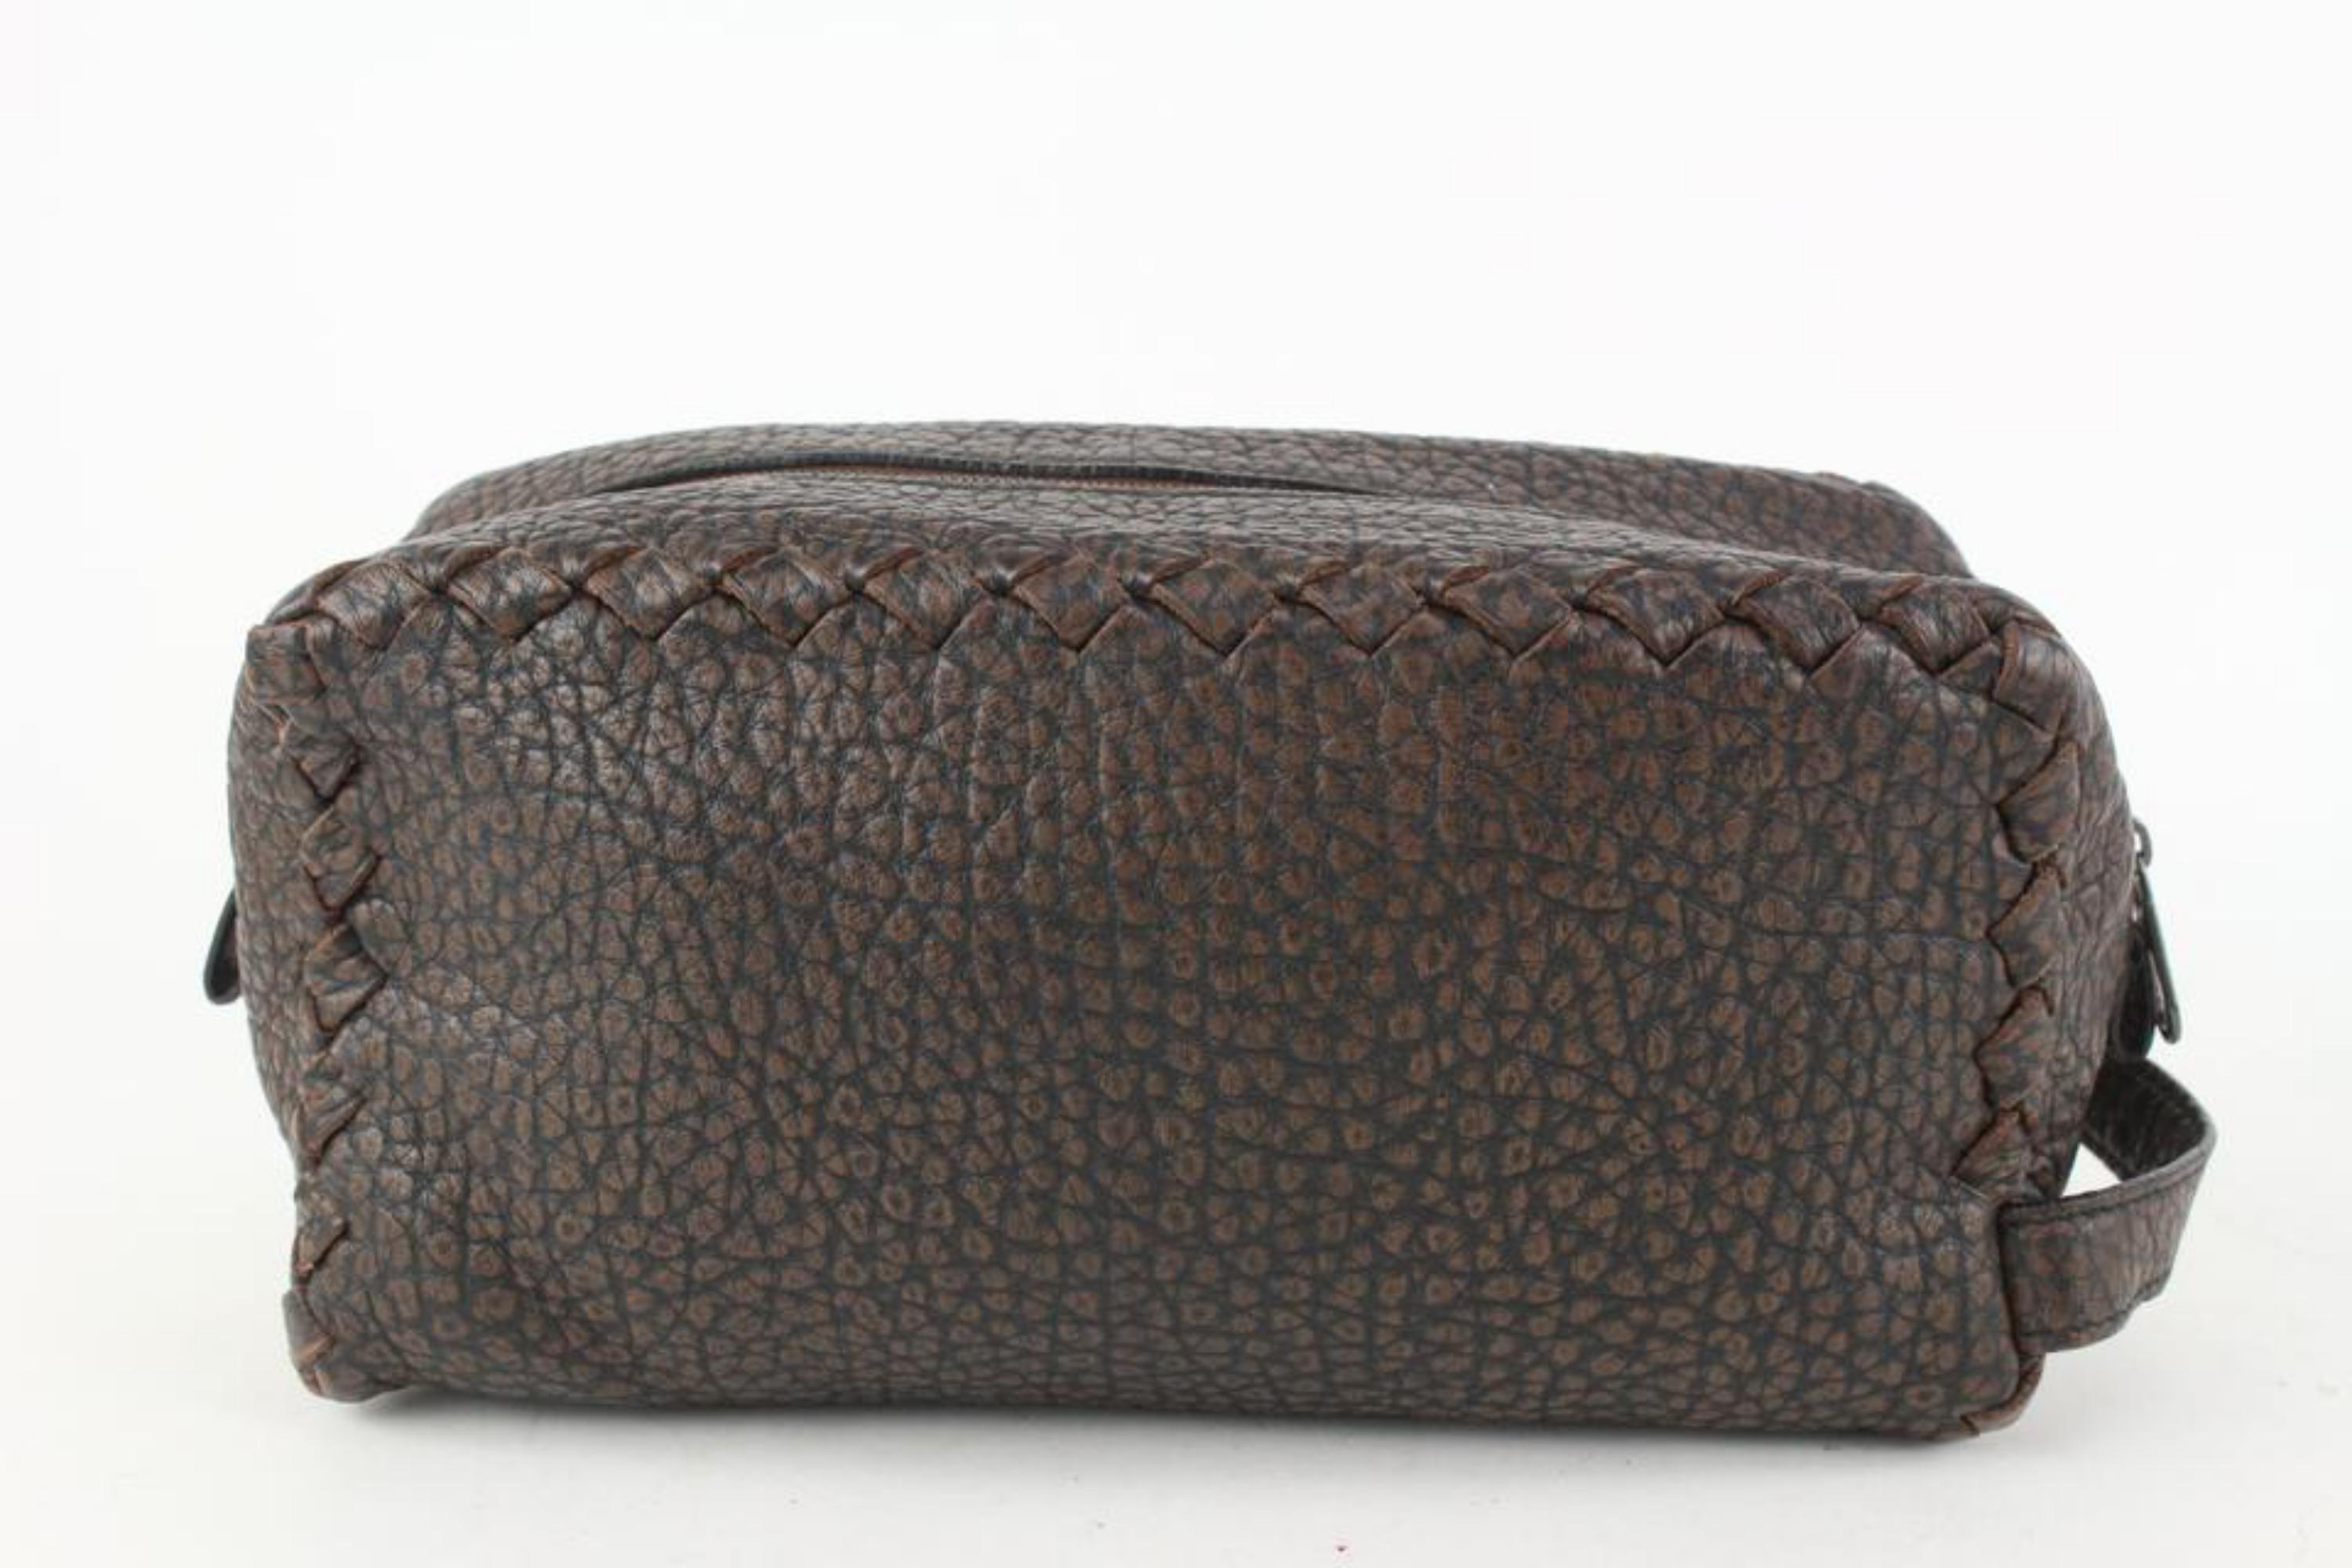 Bottega Veneta Brown Leather Cosmetic Pouch Toiletry Case 927bot37 For Sale 4